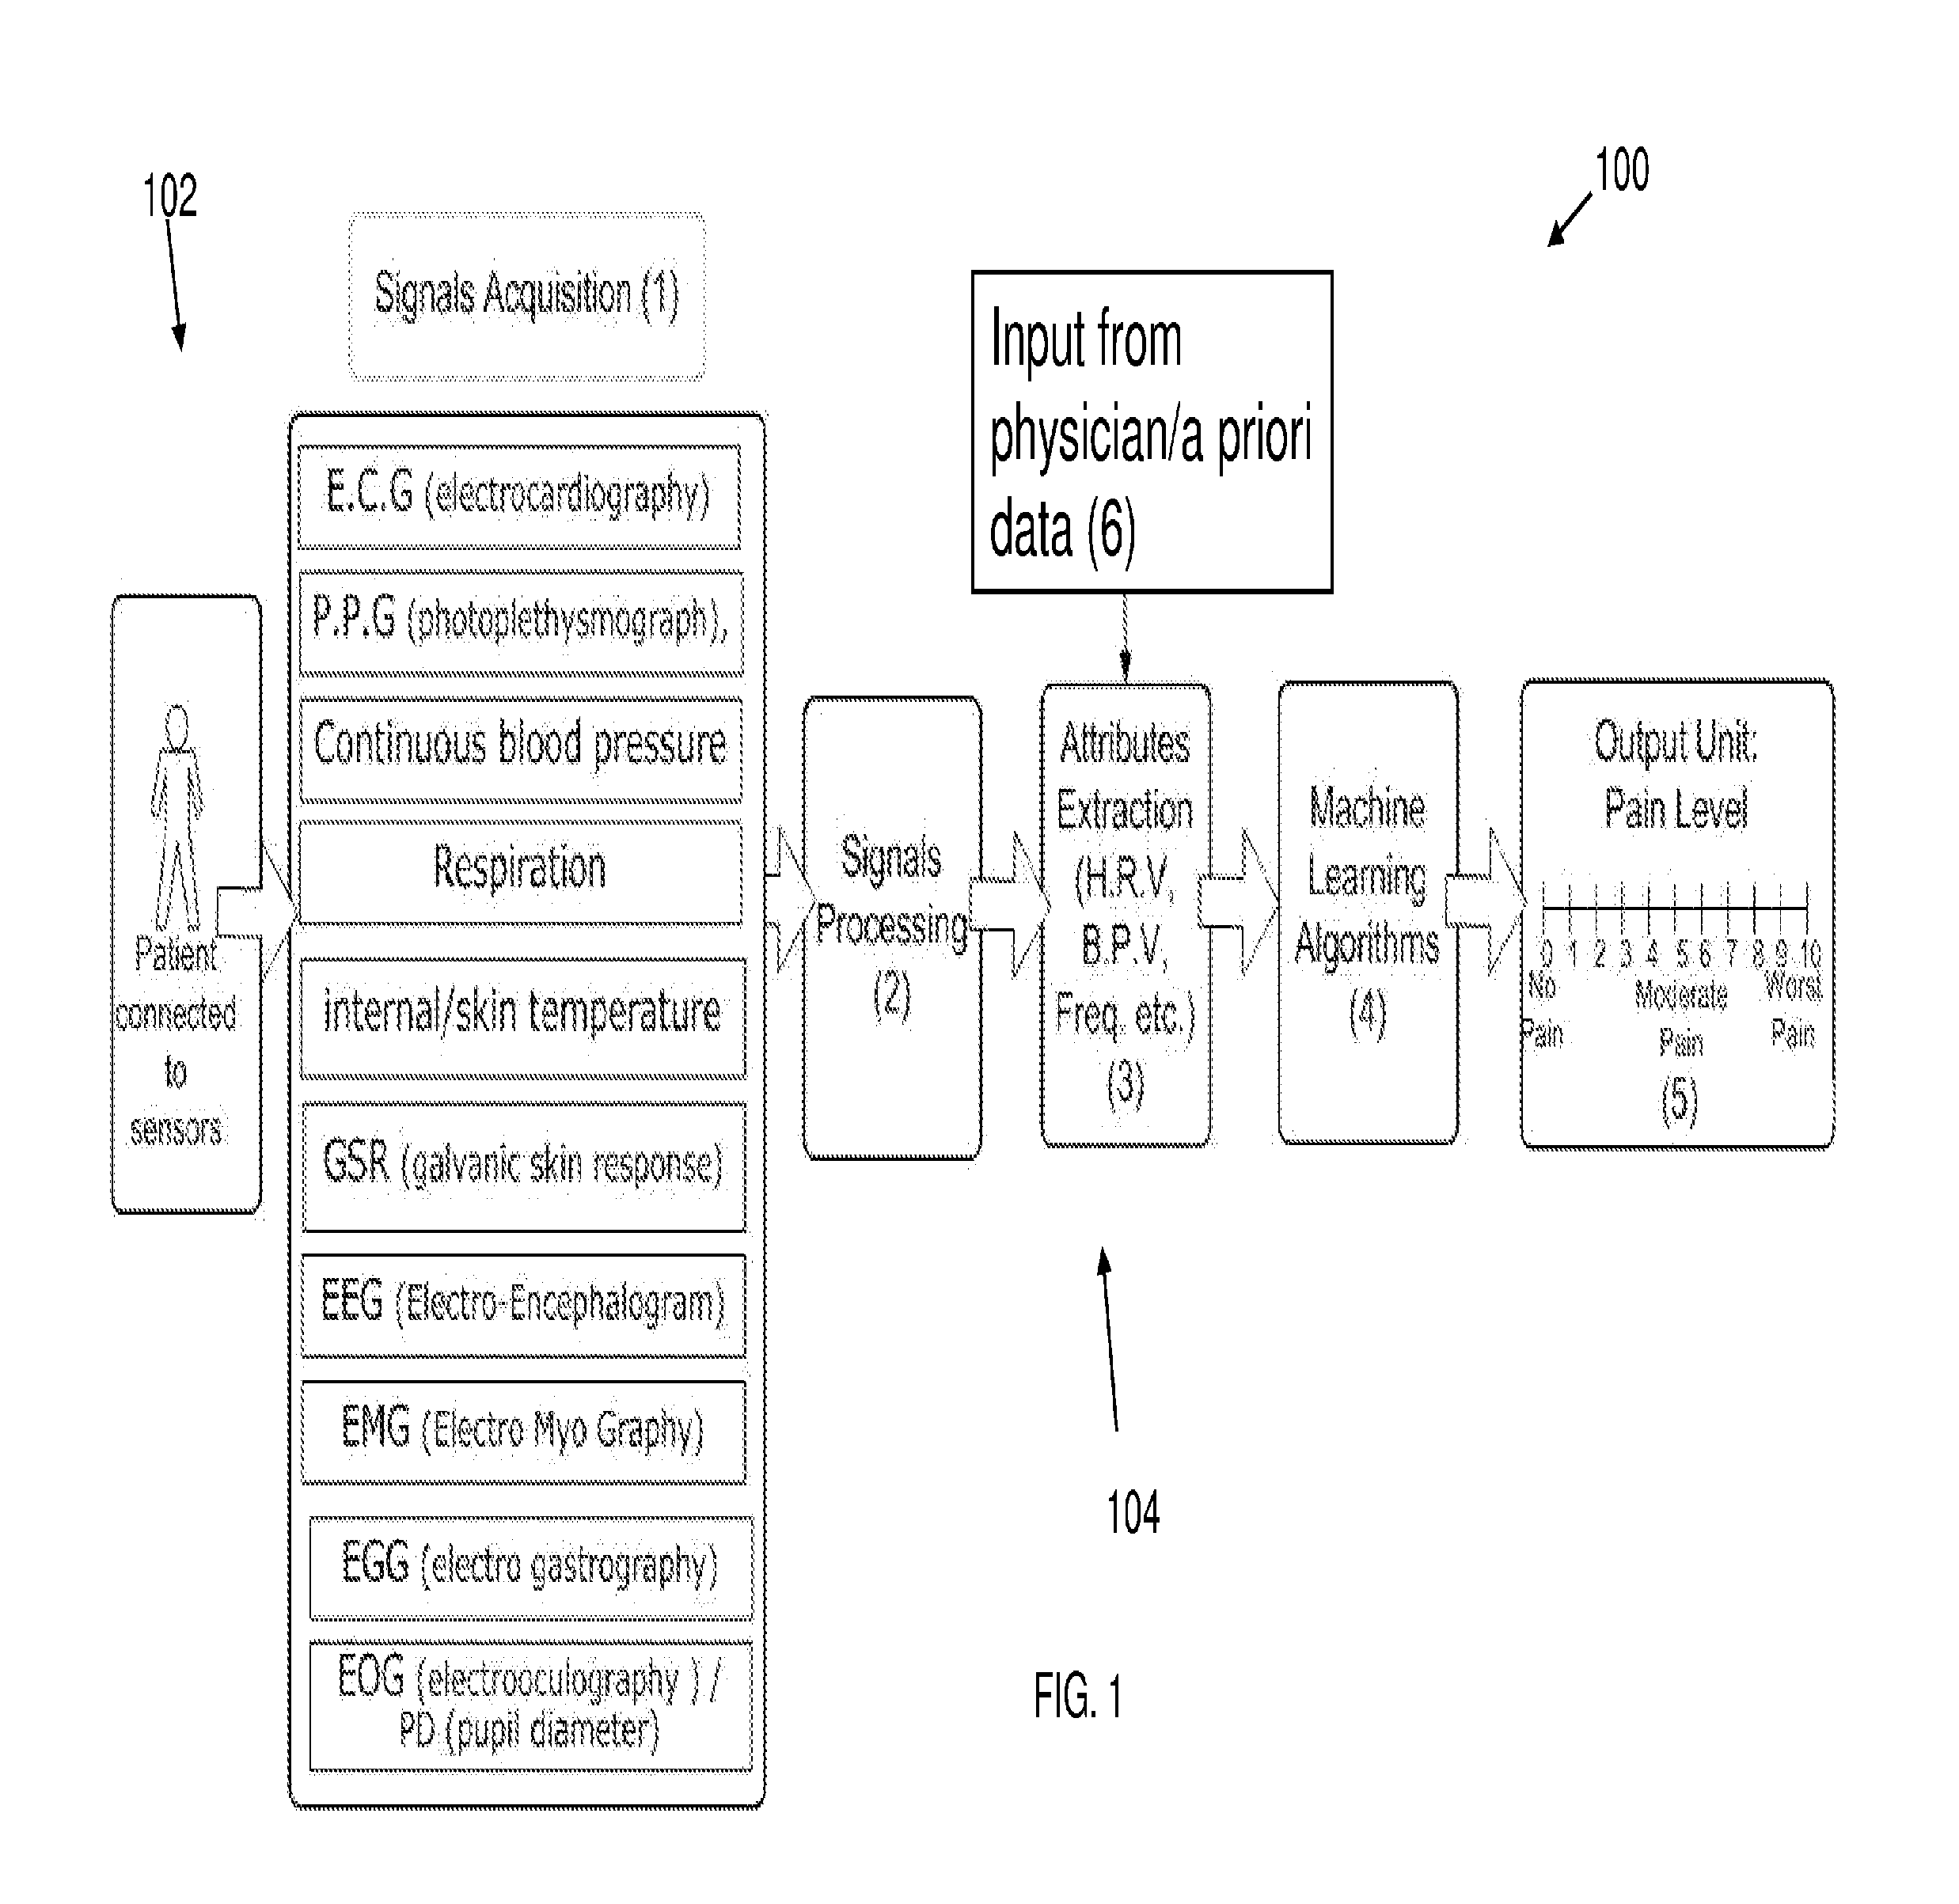 System and method for pain monitoring using a multidimensional analysis of physiological signals